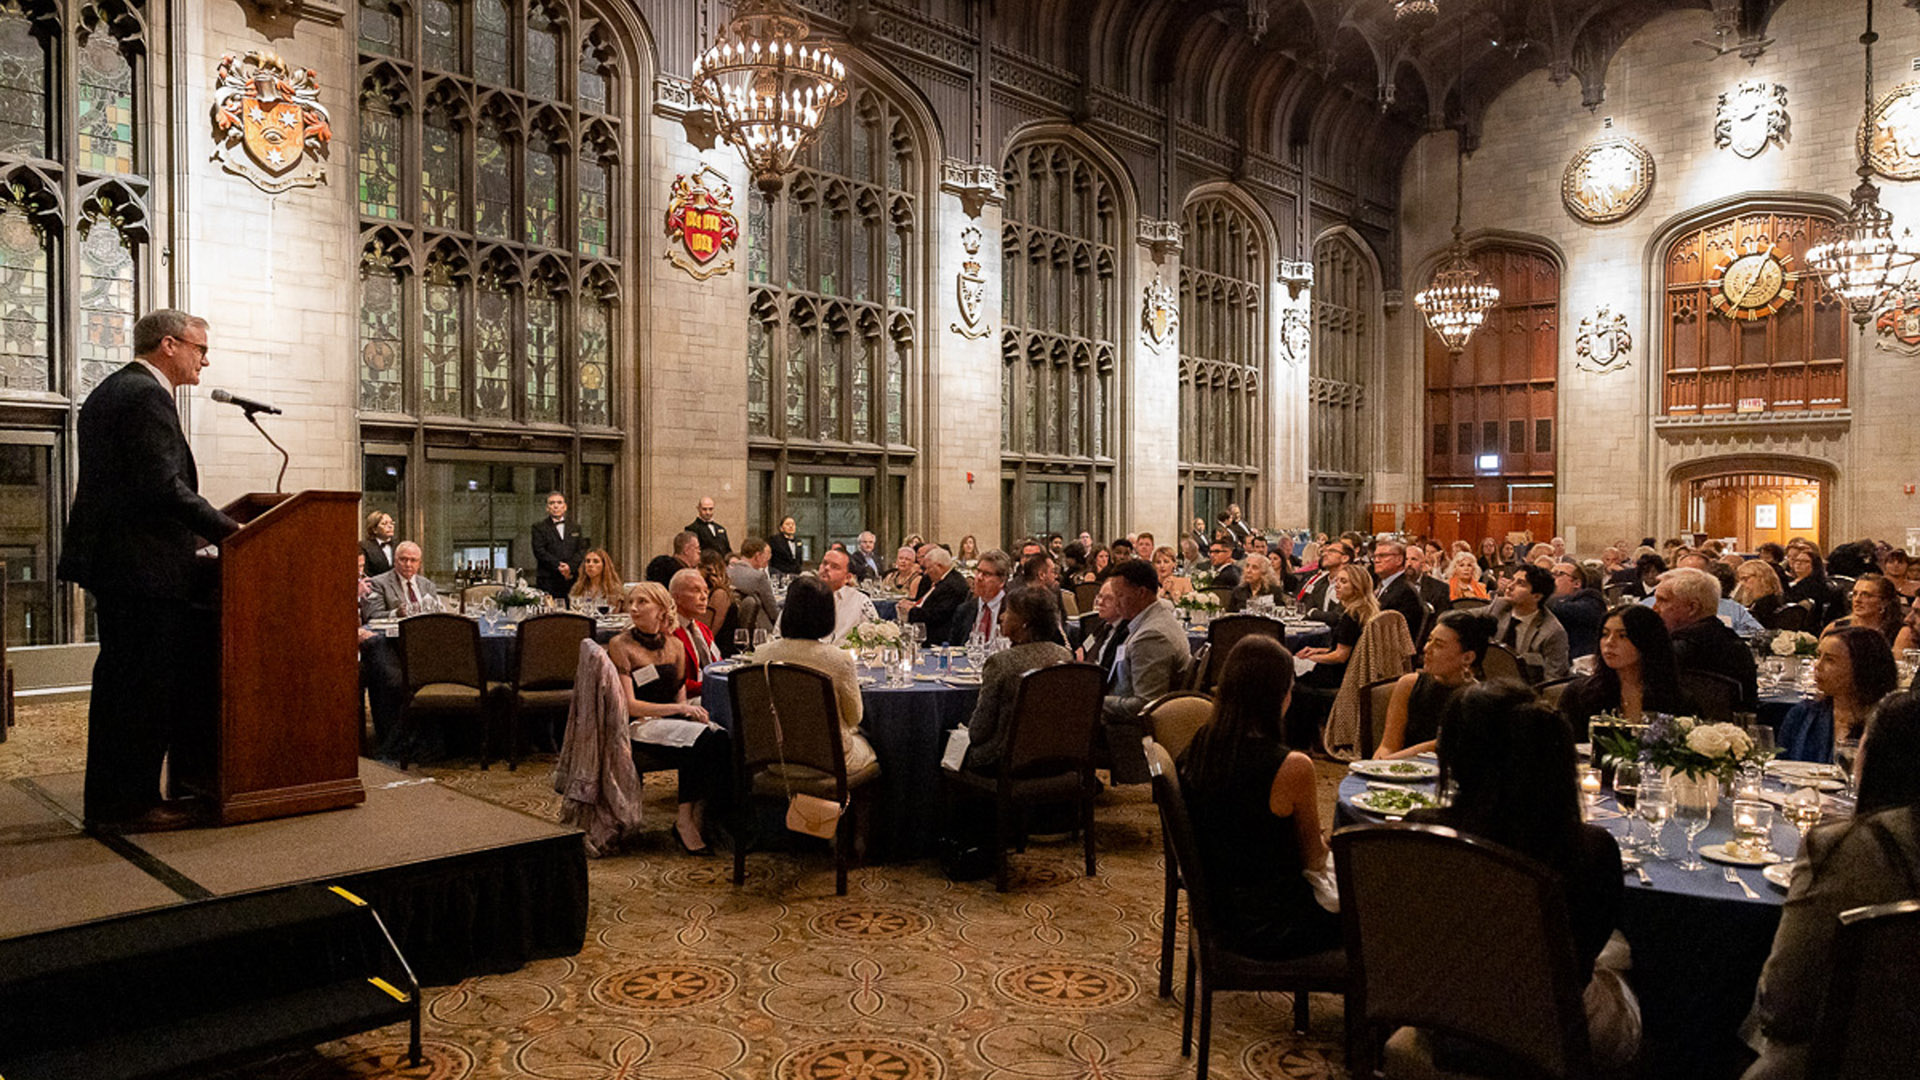 Executive Director of the Coleman Entrepreneurship Center (CEC) Bruce Leech addresses the crowd at a celebration of the CEC’s 20th anniversary, held at the University Club of Chicago on Tuesday, October 17.